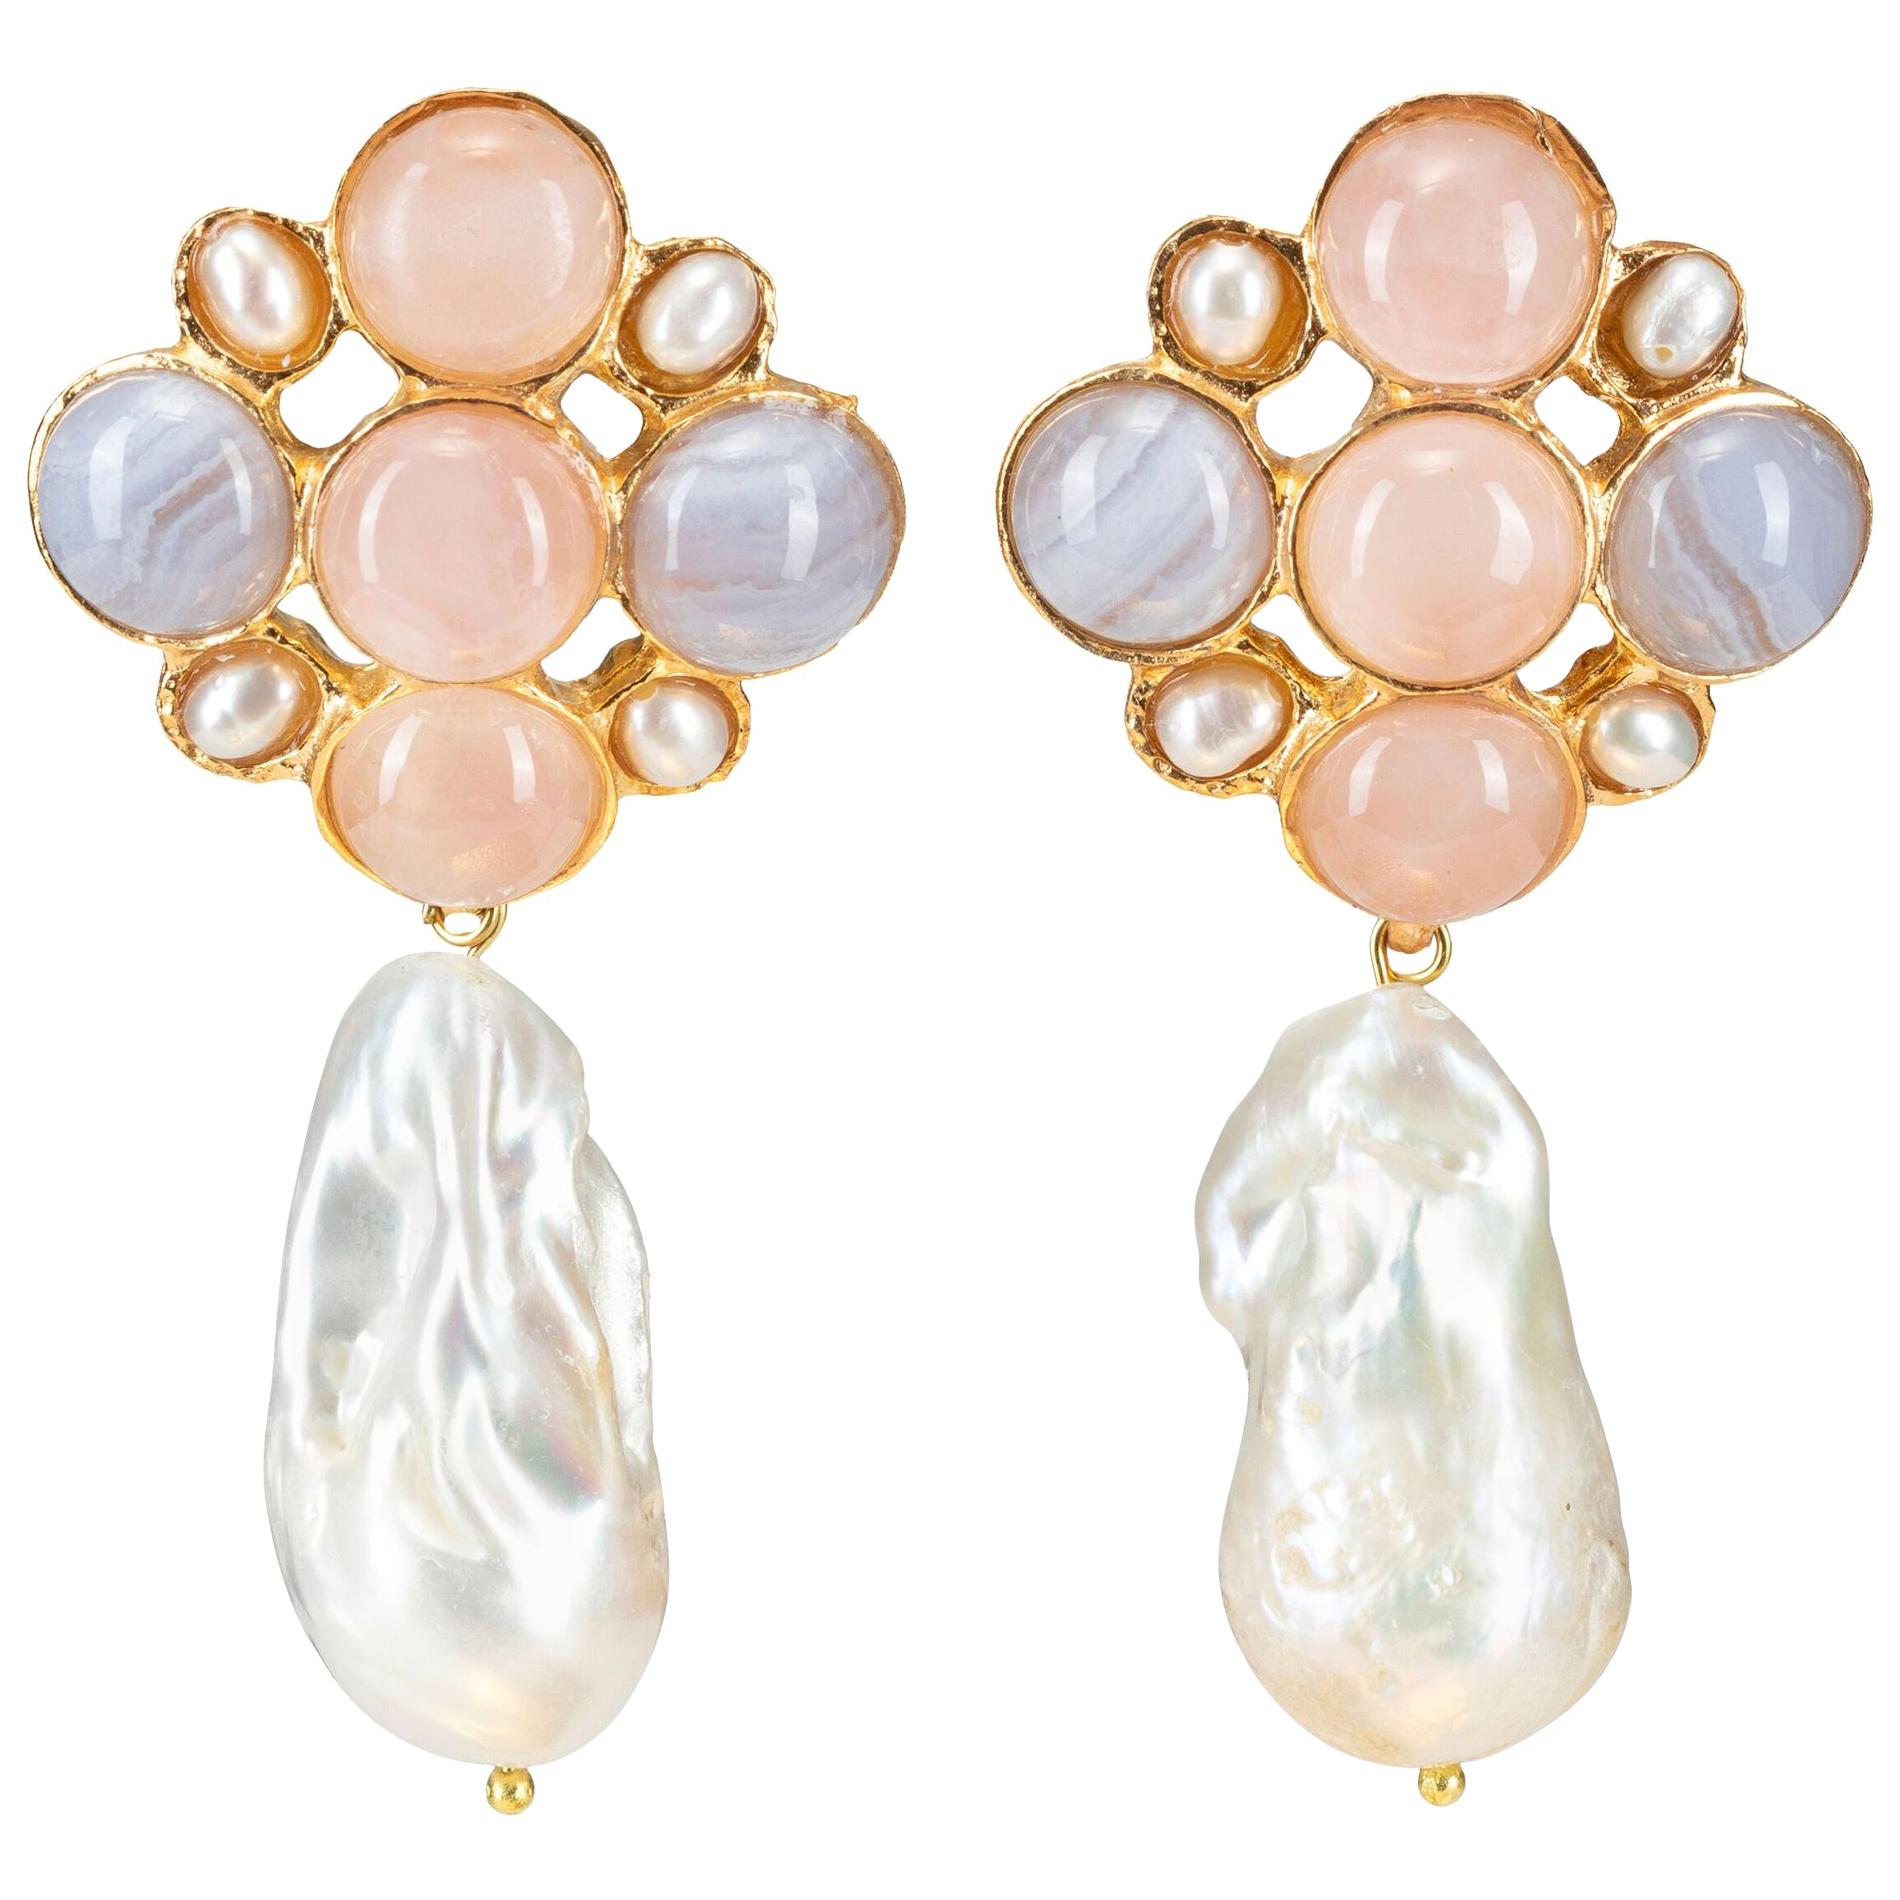 Christie Nicolaides Gold Margot Earrings in Pale Pink & Pearl For Sale